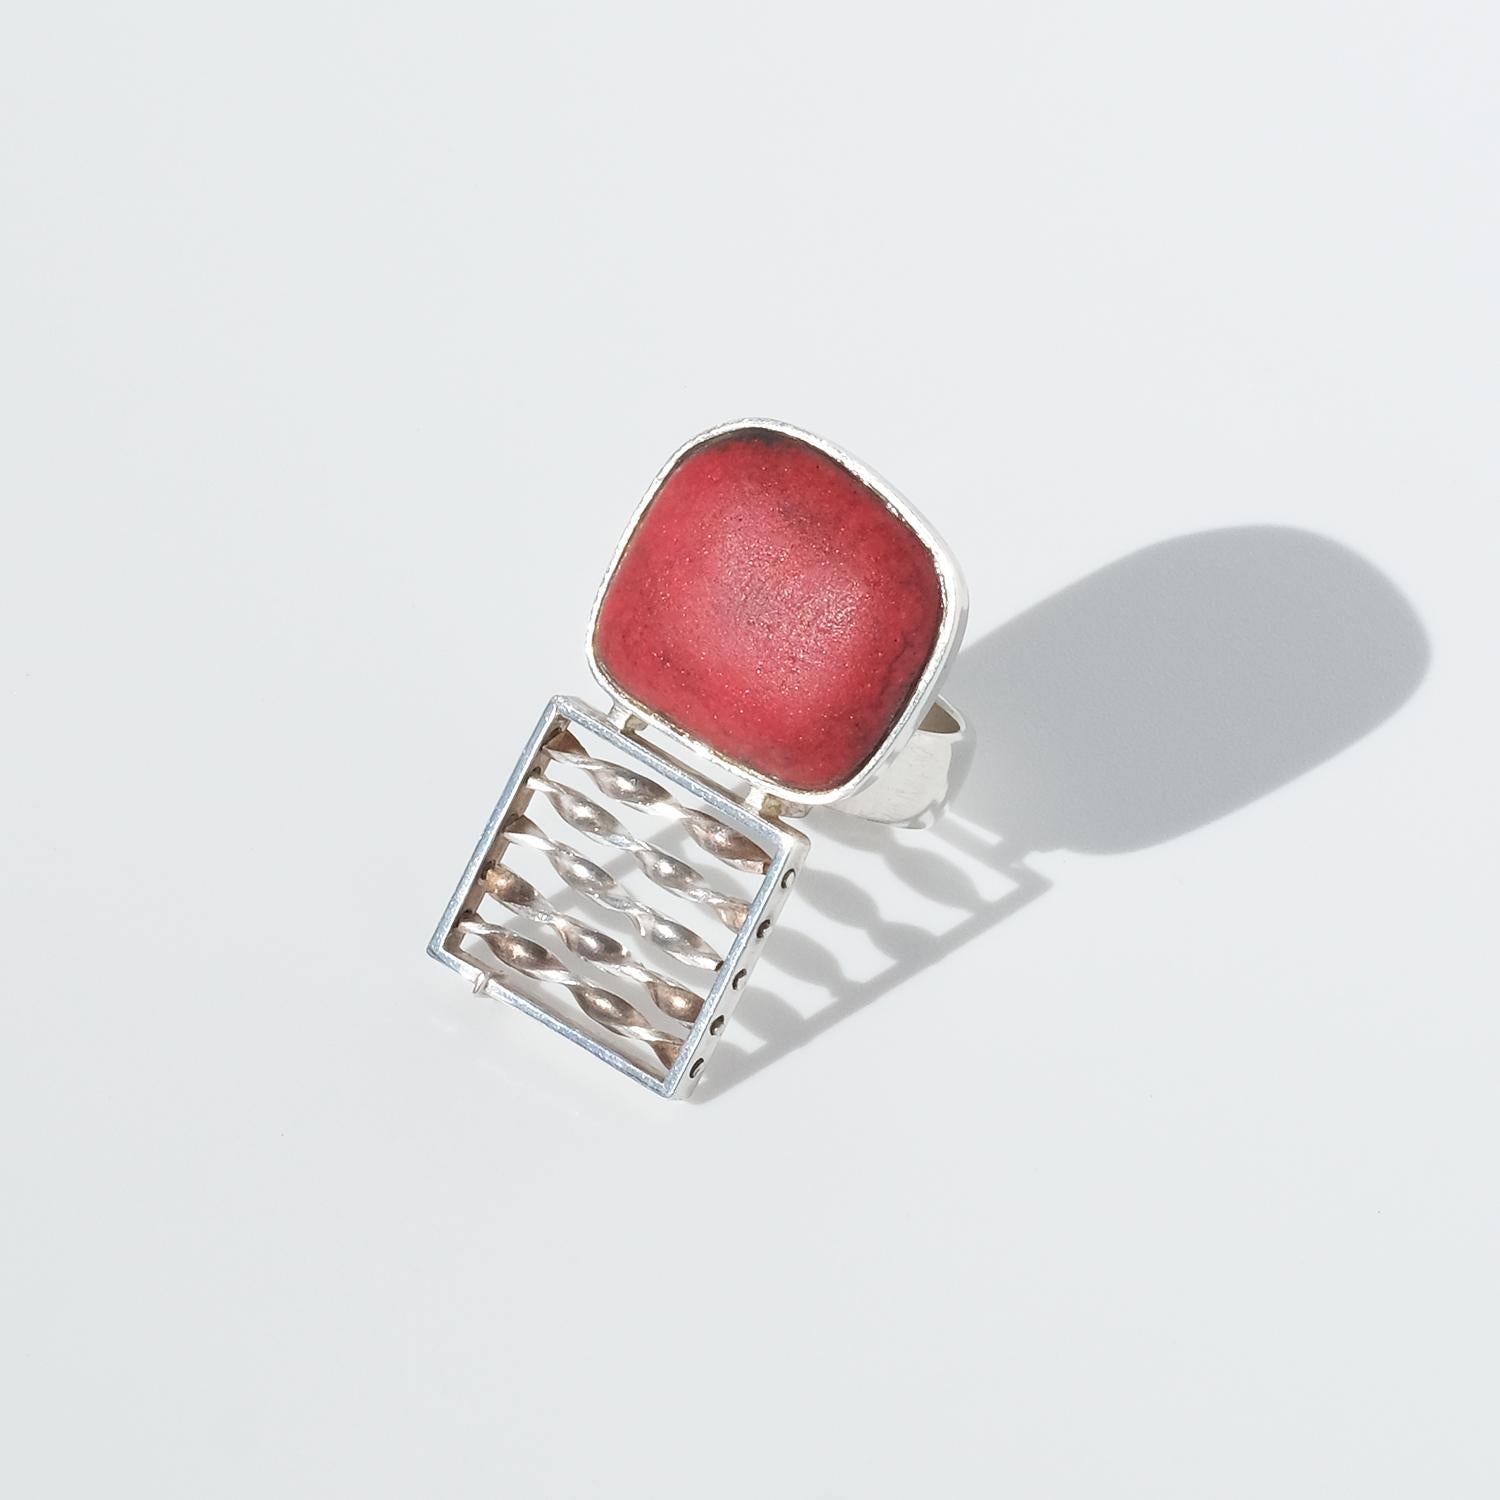 Women's or Men's Silver and Red Stone Ring by Thomas Raschke For Sale